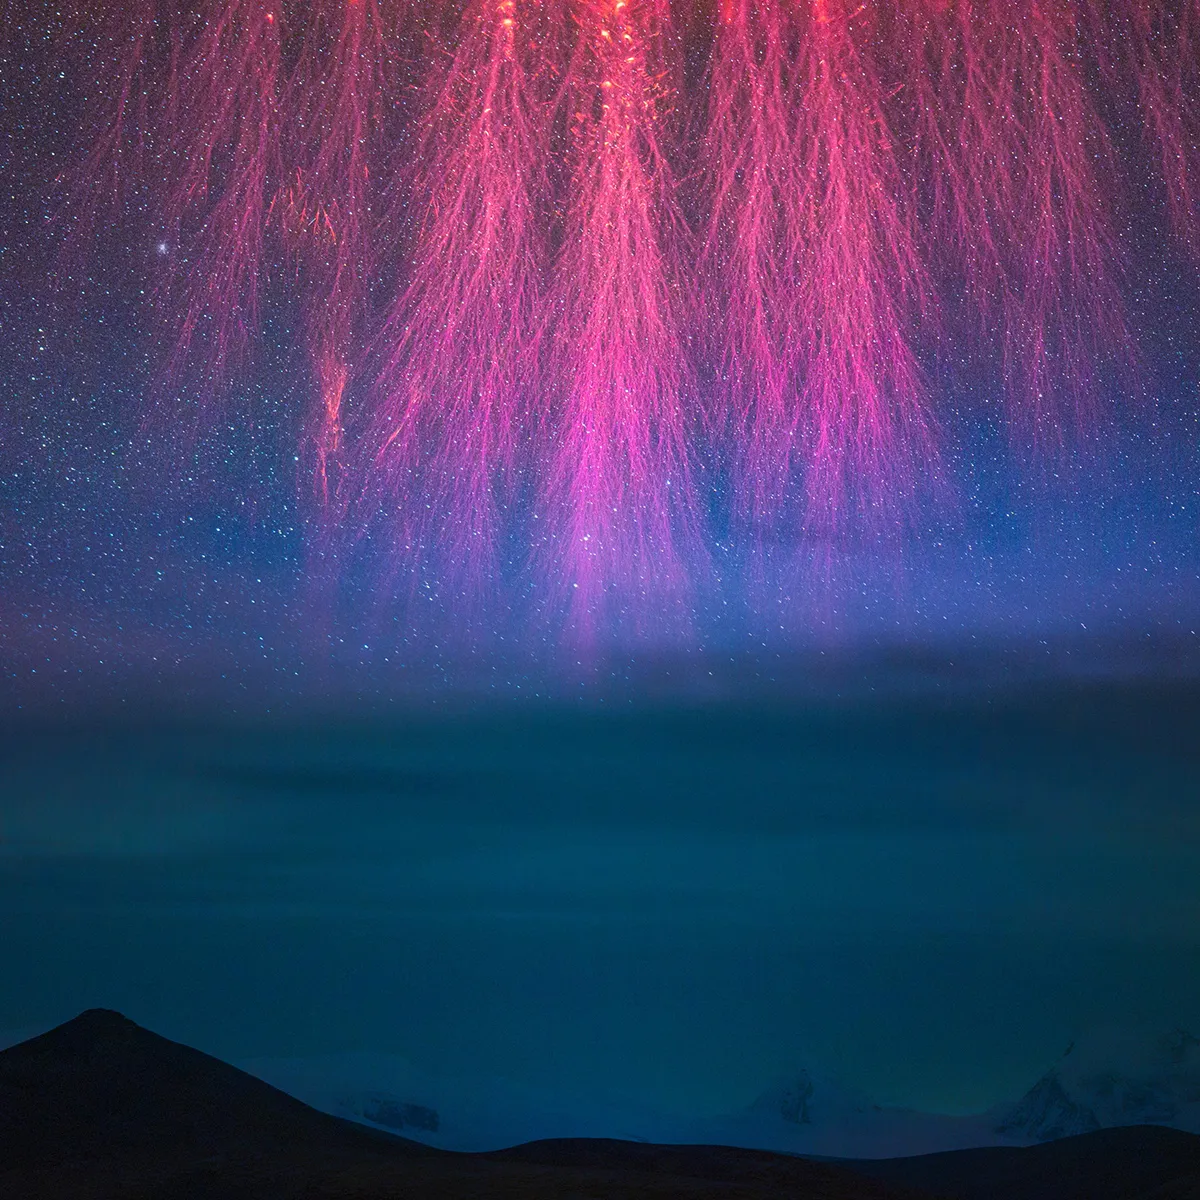 Grand Cosmic Fireworks © Angel An. Location: Lake Puma Yumco, Tibet, China. Winner, Skyscapes category. Taken with a Sony ILCE-7S3 camera, 135 mm f/1.8, ISO 12800, 4-second exposure